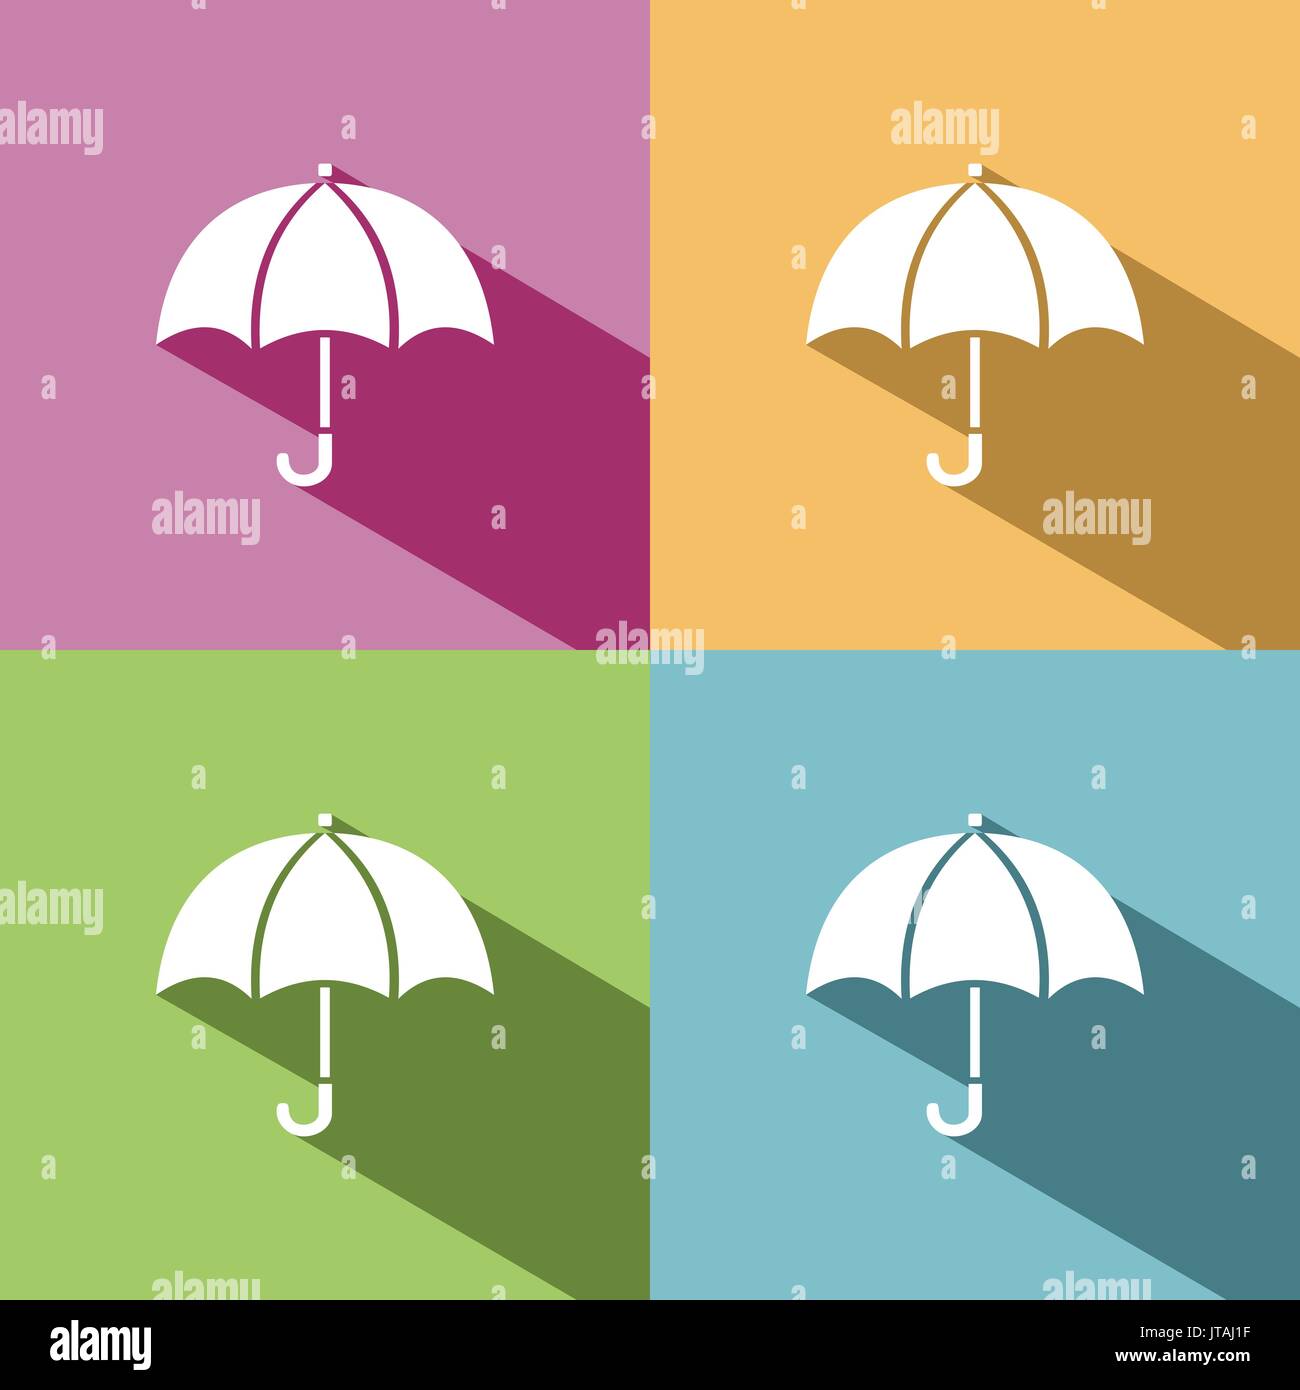 Umbrella icon with shade on colored background Stock Vector